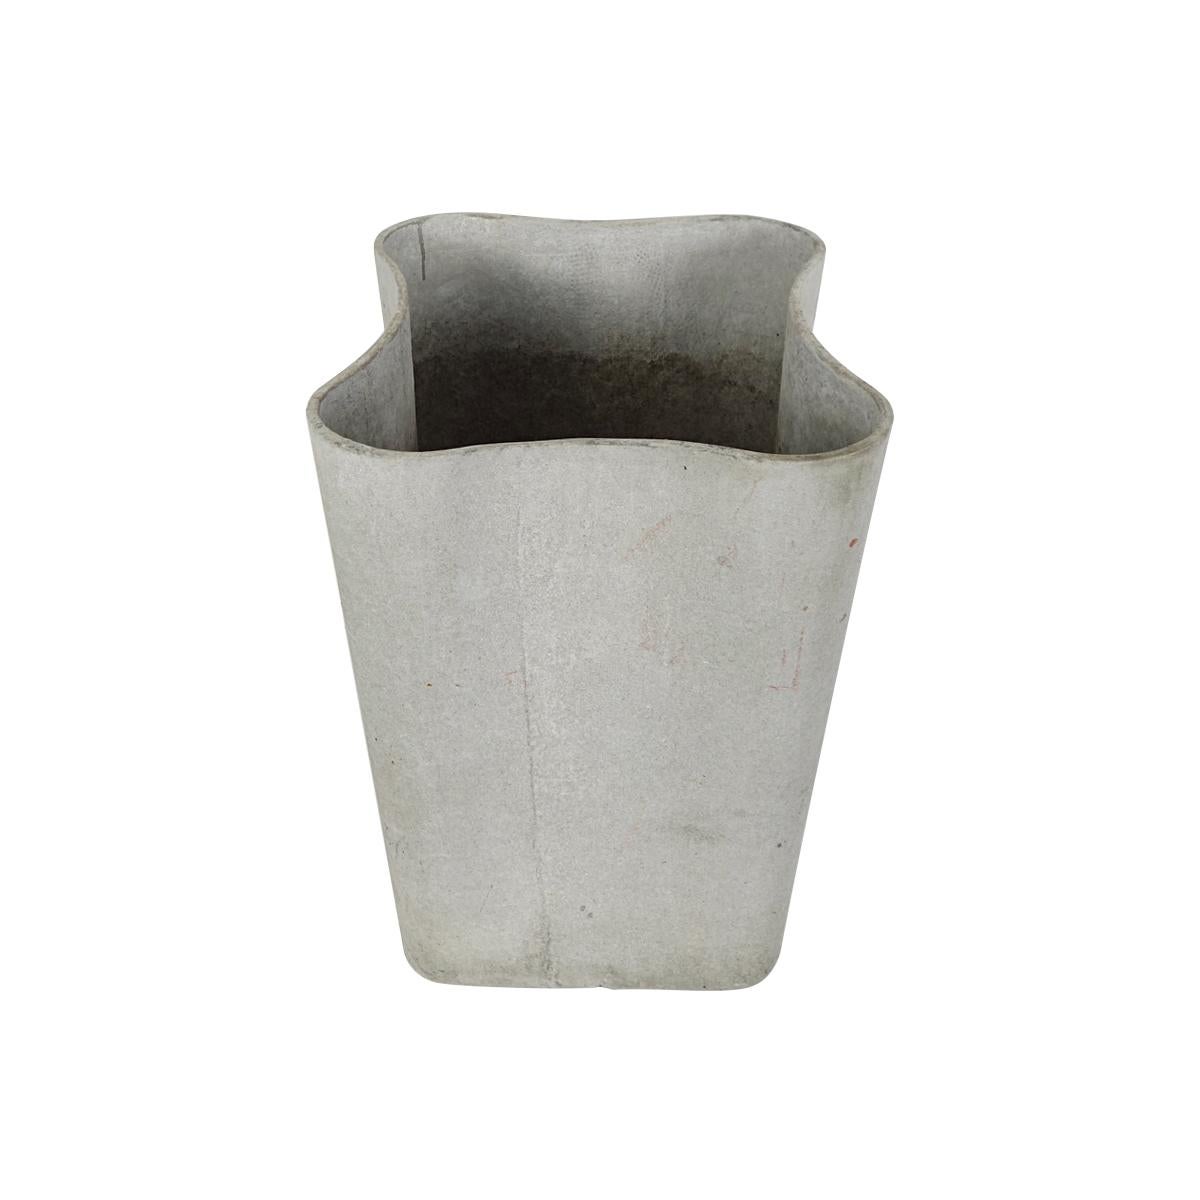 Organic Modern Set of 2 Planters Mira  by Alfred Häberli and Christophe Marchand for Eternit  For Sale